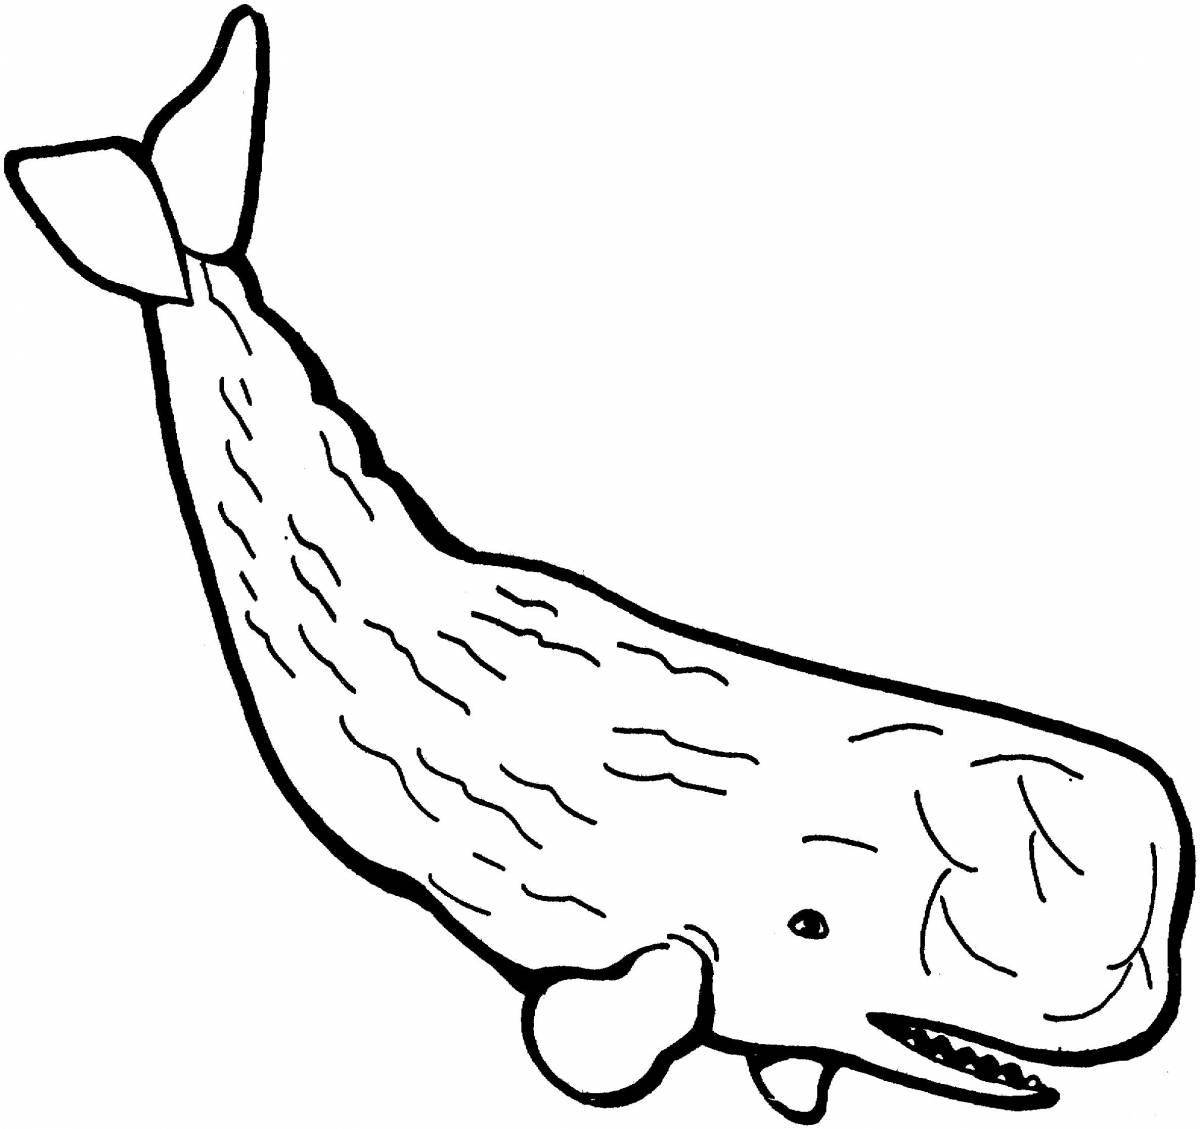 Brilliant coloring page drawing of a whale